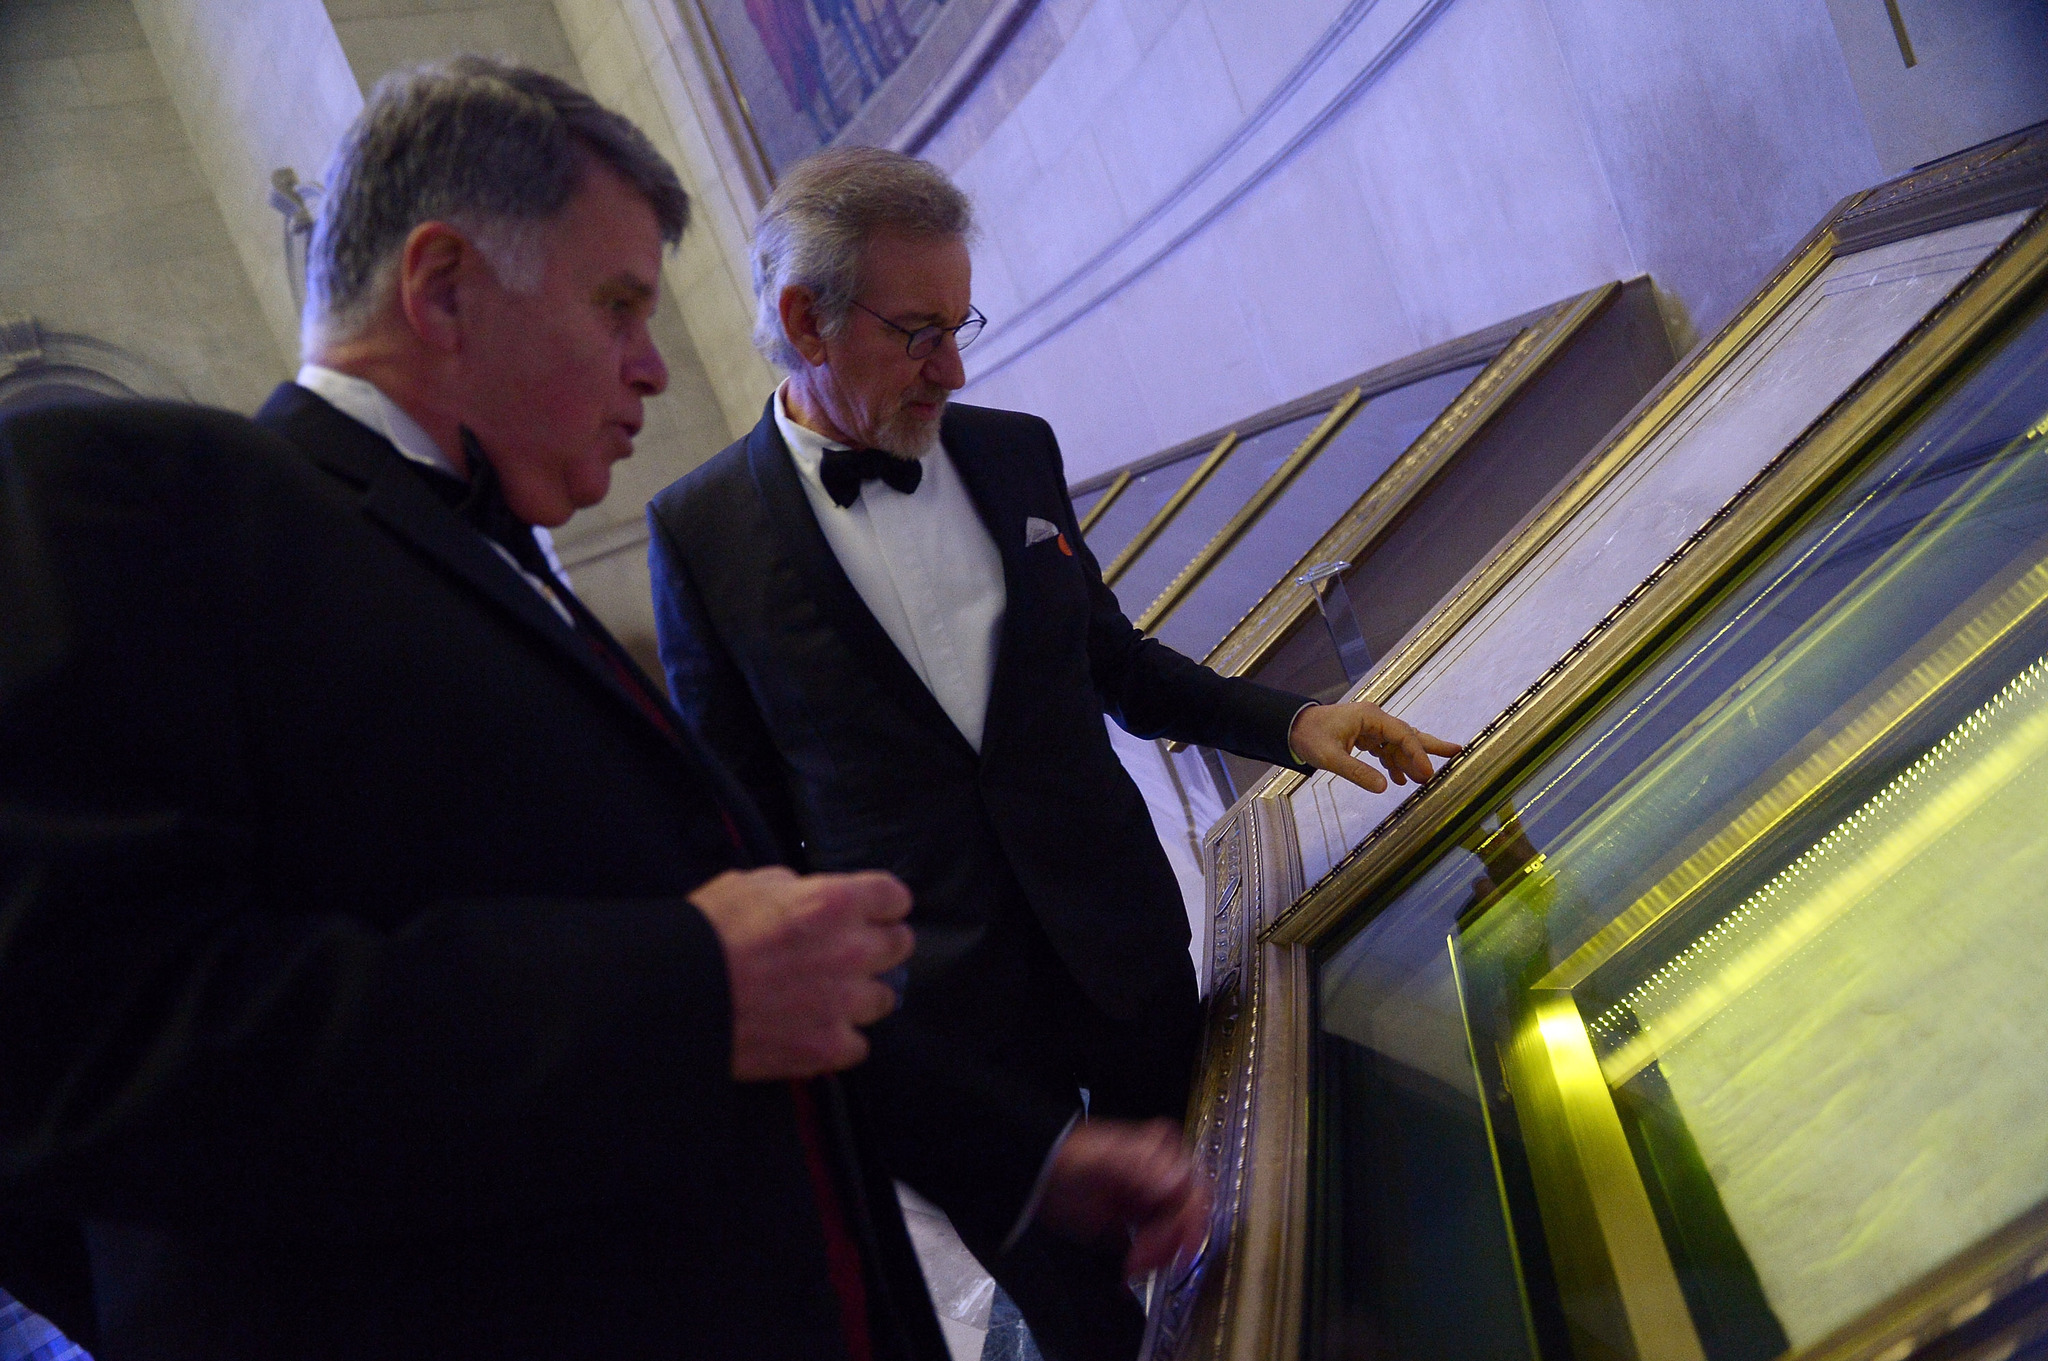 Archivist of the United States The Honorable David S. Ferriero (L) and Filmmaker and honoree Steven Spielberg view the Constitution of the United States at the Foundation for the National Archives 2013 Records of Achievement award ceremony and gala in honor of Steven Spielberg on November 19, 2013 in Washington, D.C.